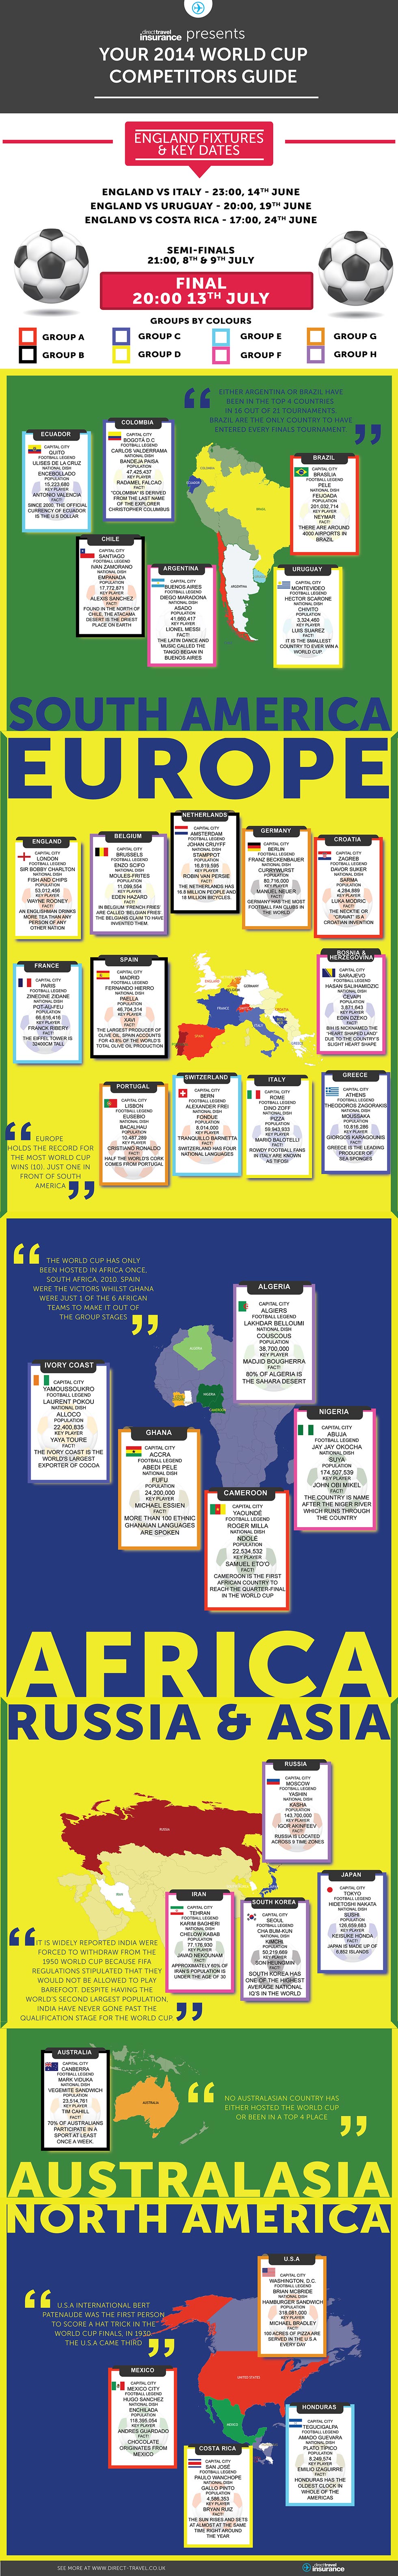 Direct Travel 2014 World Cup infographic